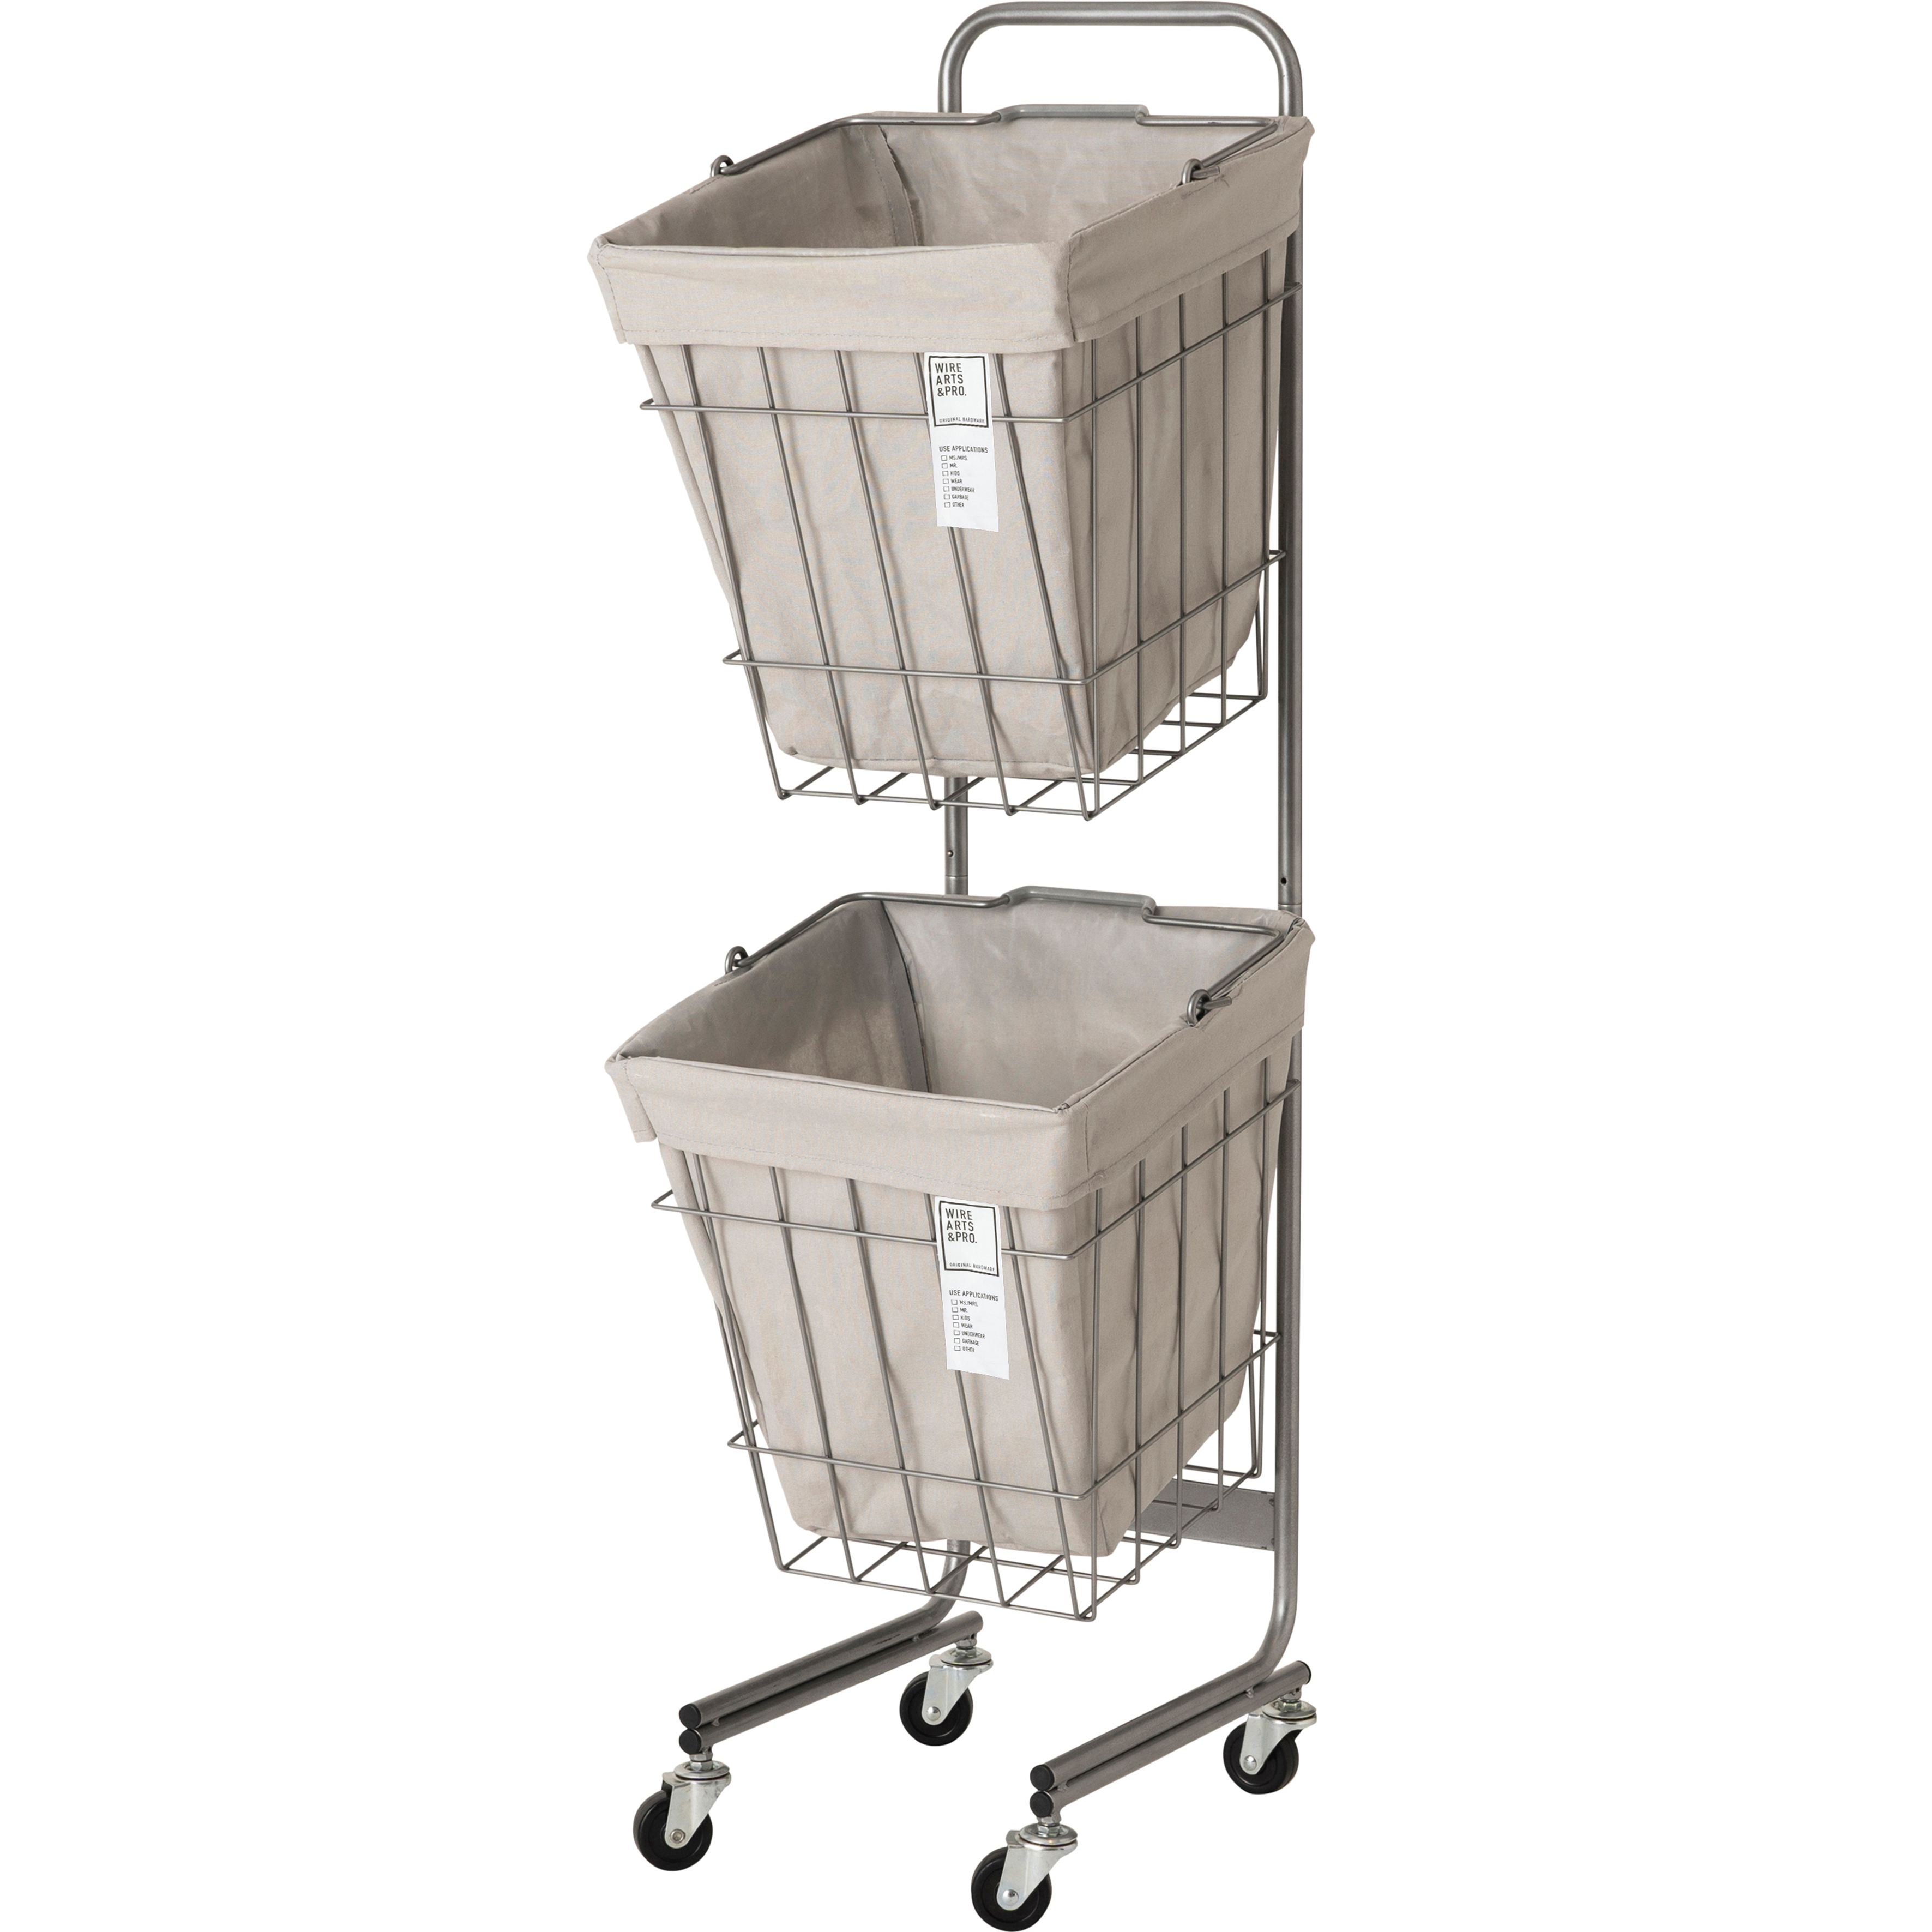 003327 WIRE ARTS & PRO.LAUNDRY SQUARE BASKET DOUBLE WITH CASTER 